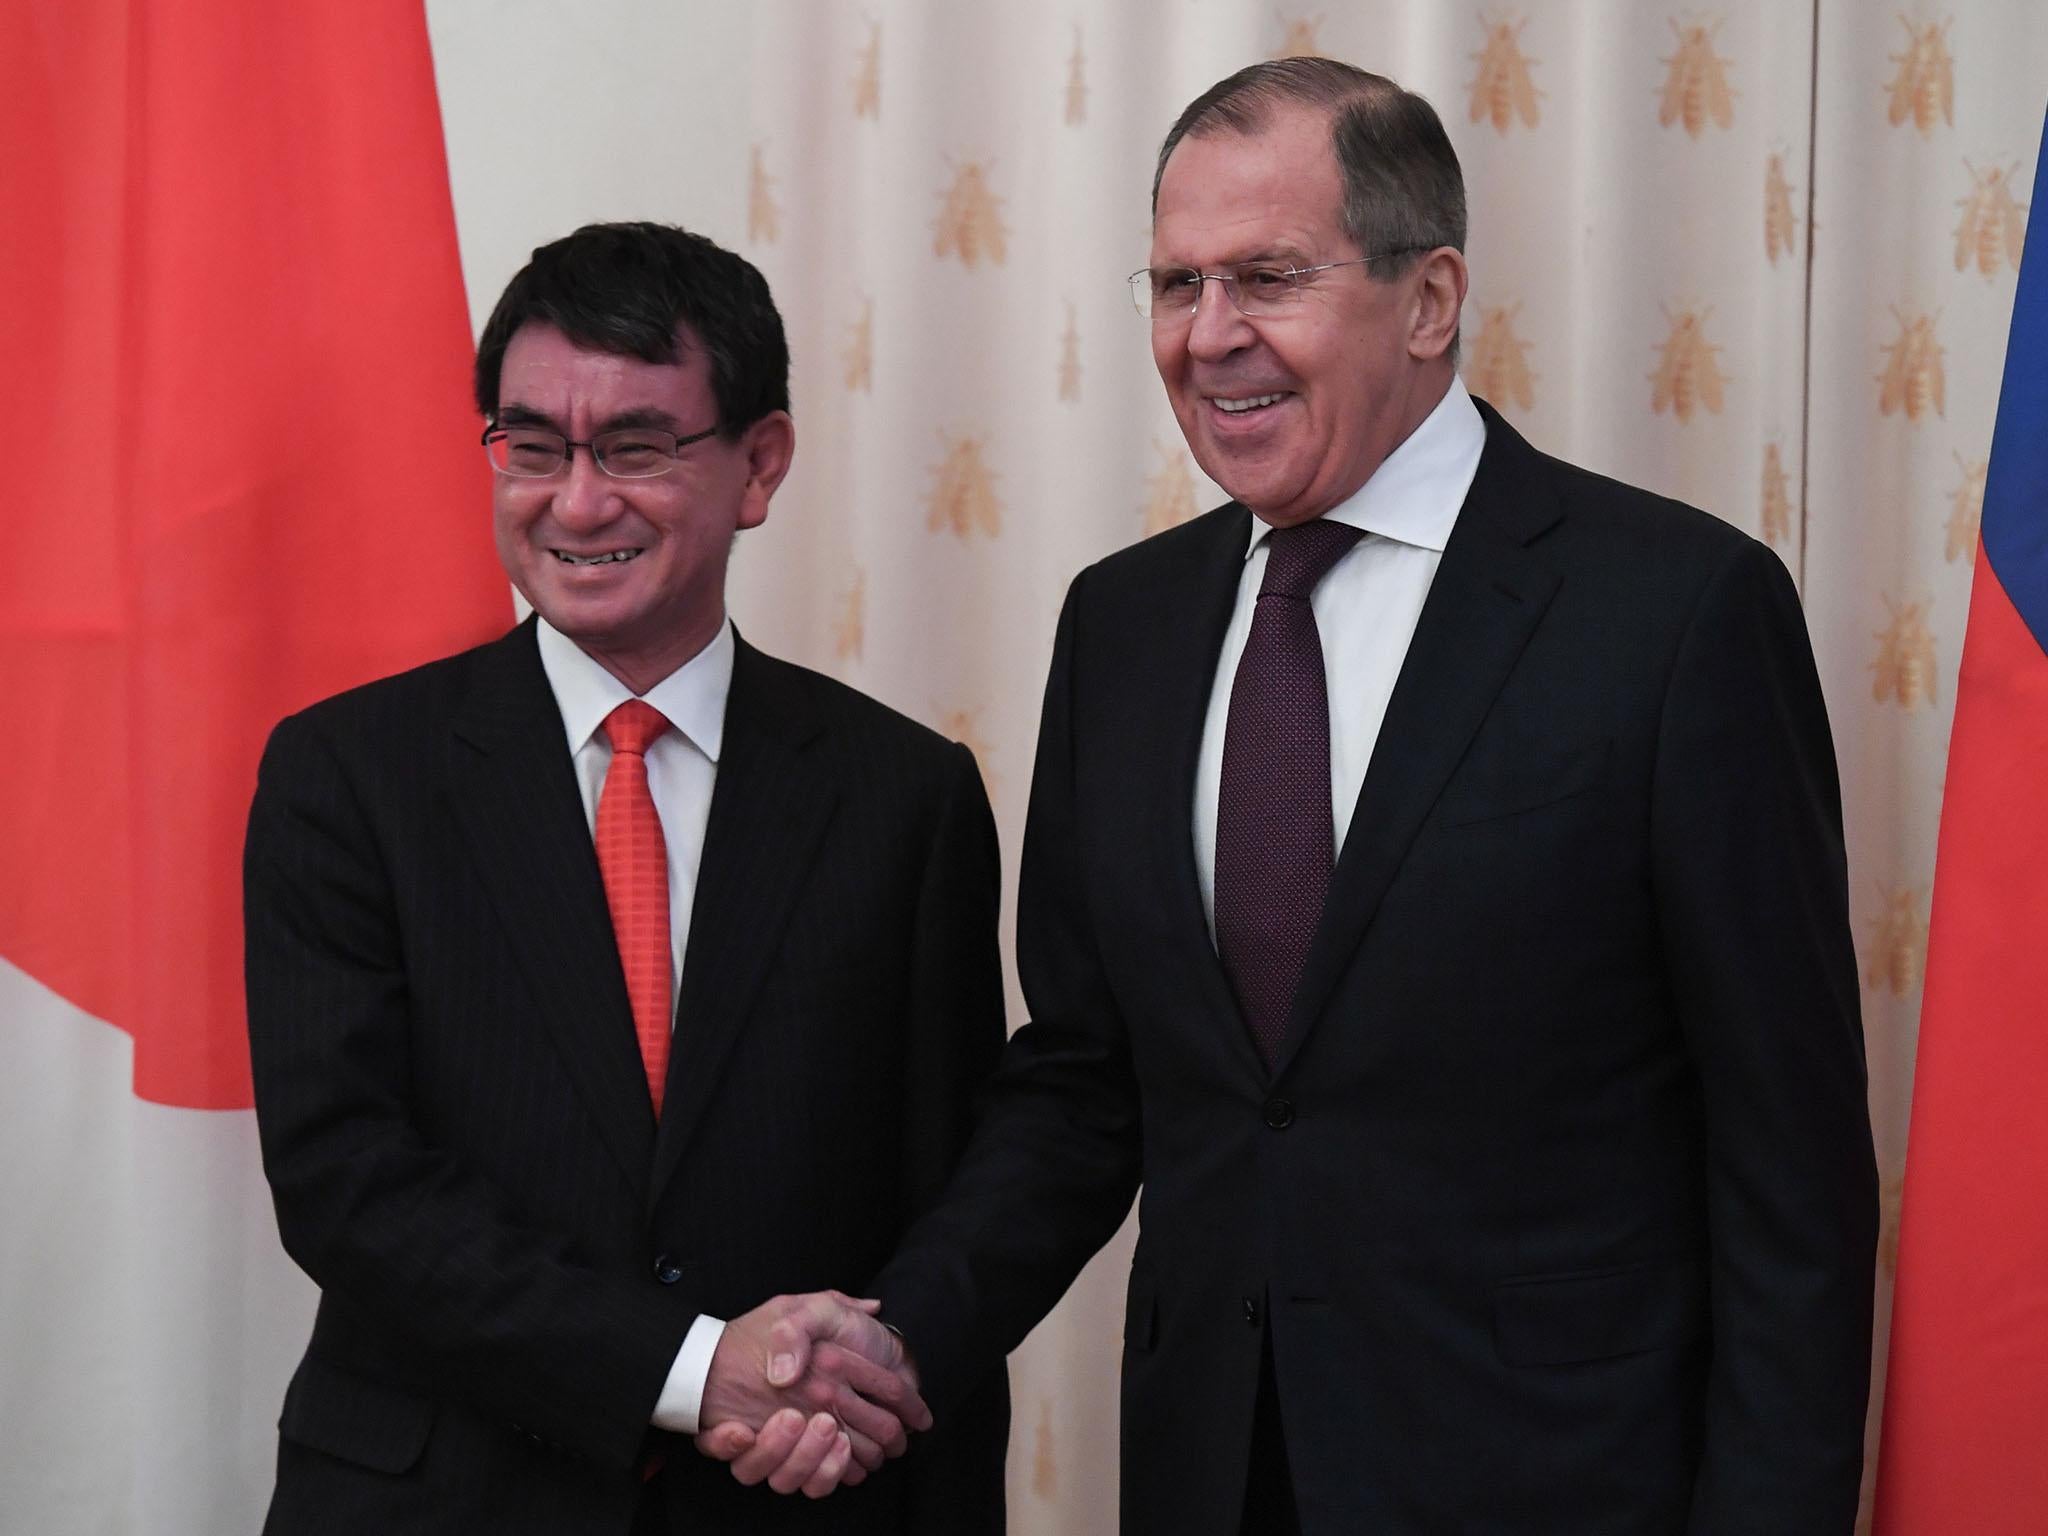 Russian foreign minister Sergei Lavrov (right) with his Japanese counterpart Taro Kono in Moscow